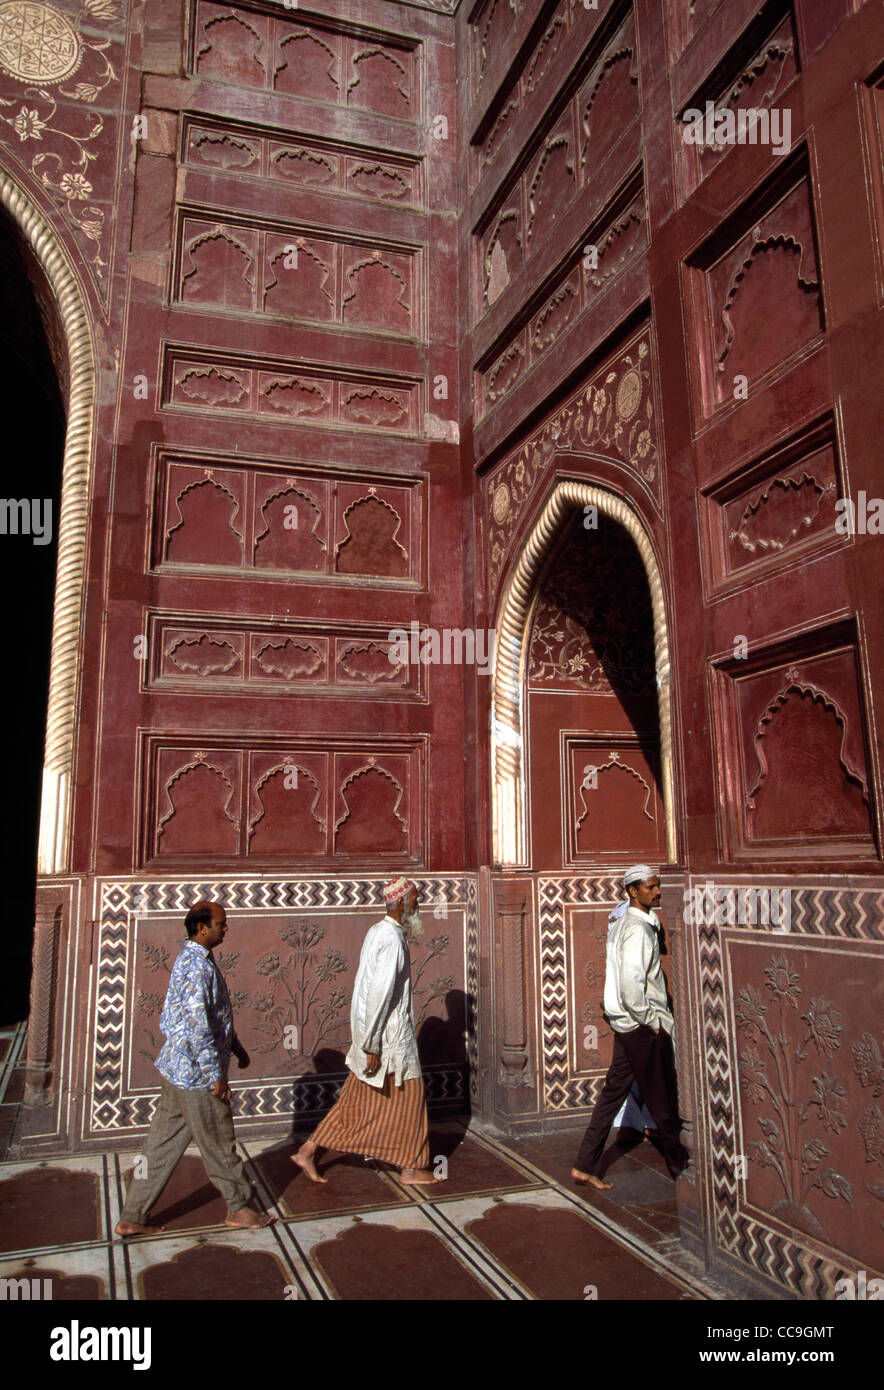 Muslim men walk to pray inside a sandstone structure next to the Taj Mahal in Agra, India. Built in 1653 by Emperor Shah Jahan. Stock Photo